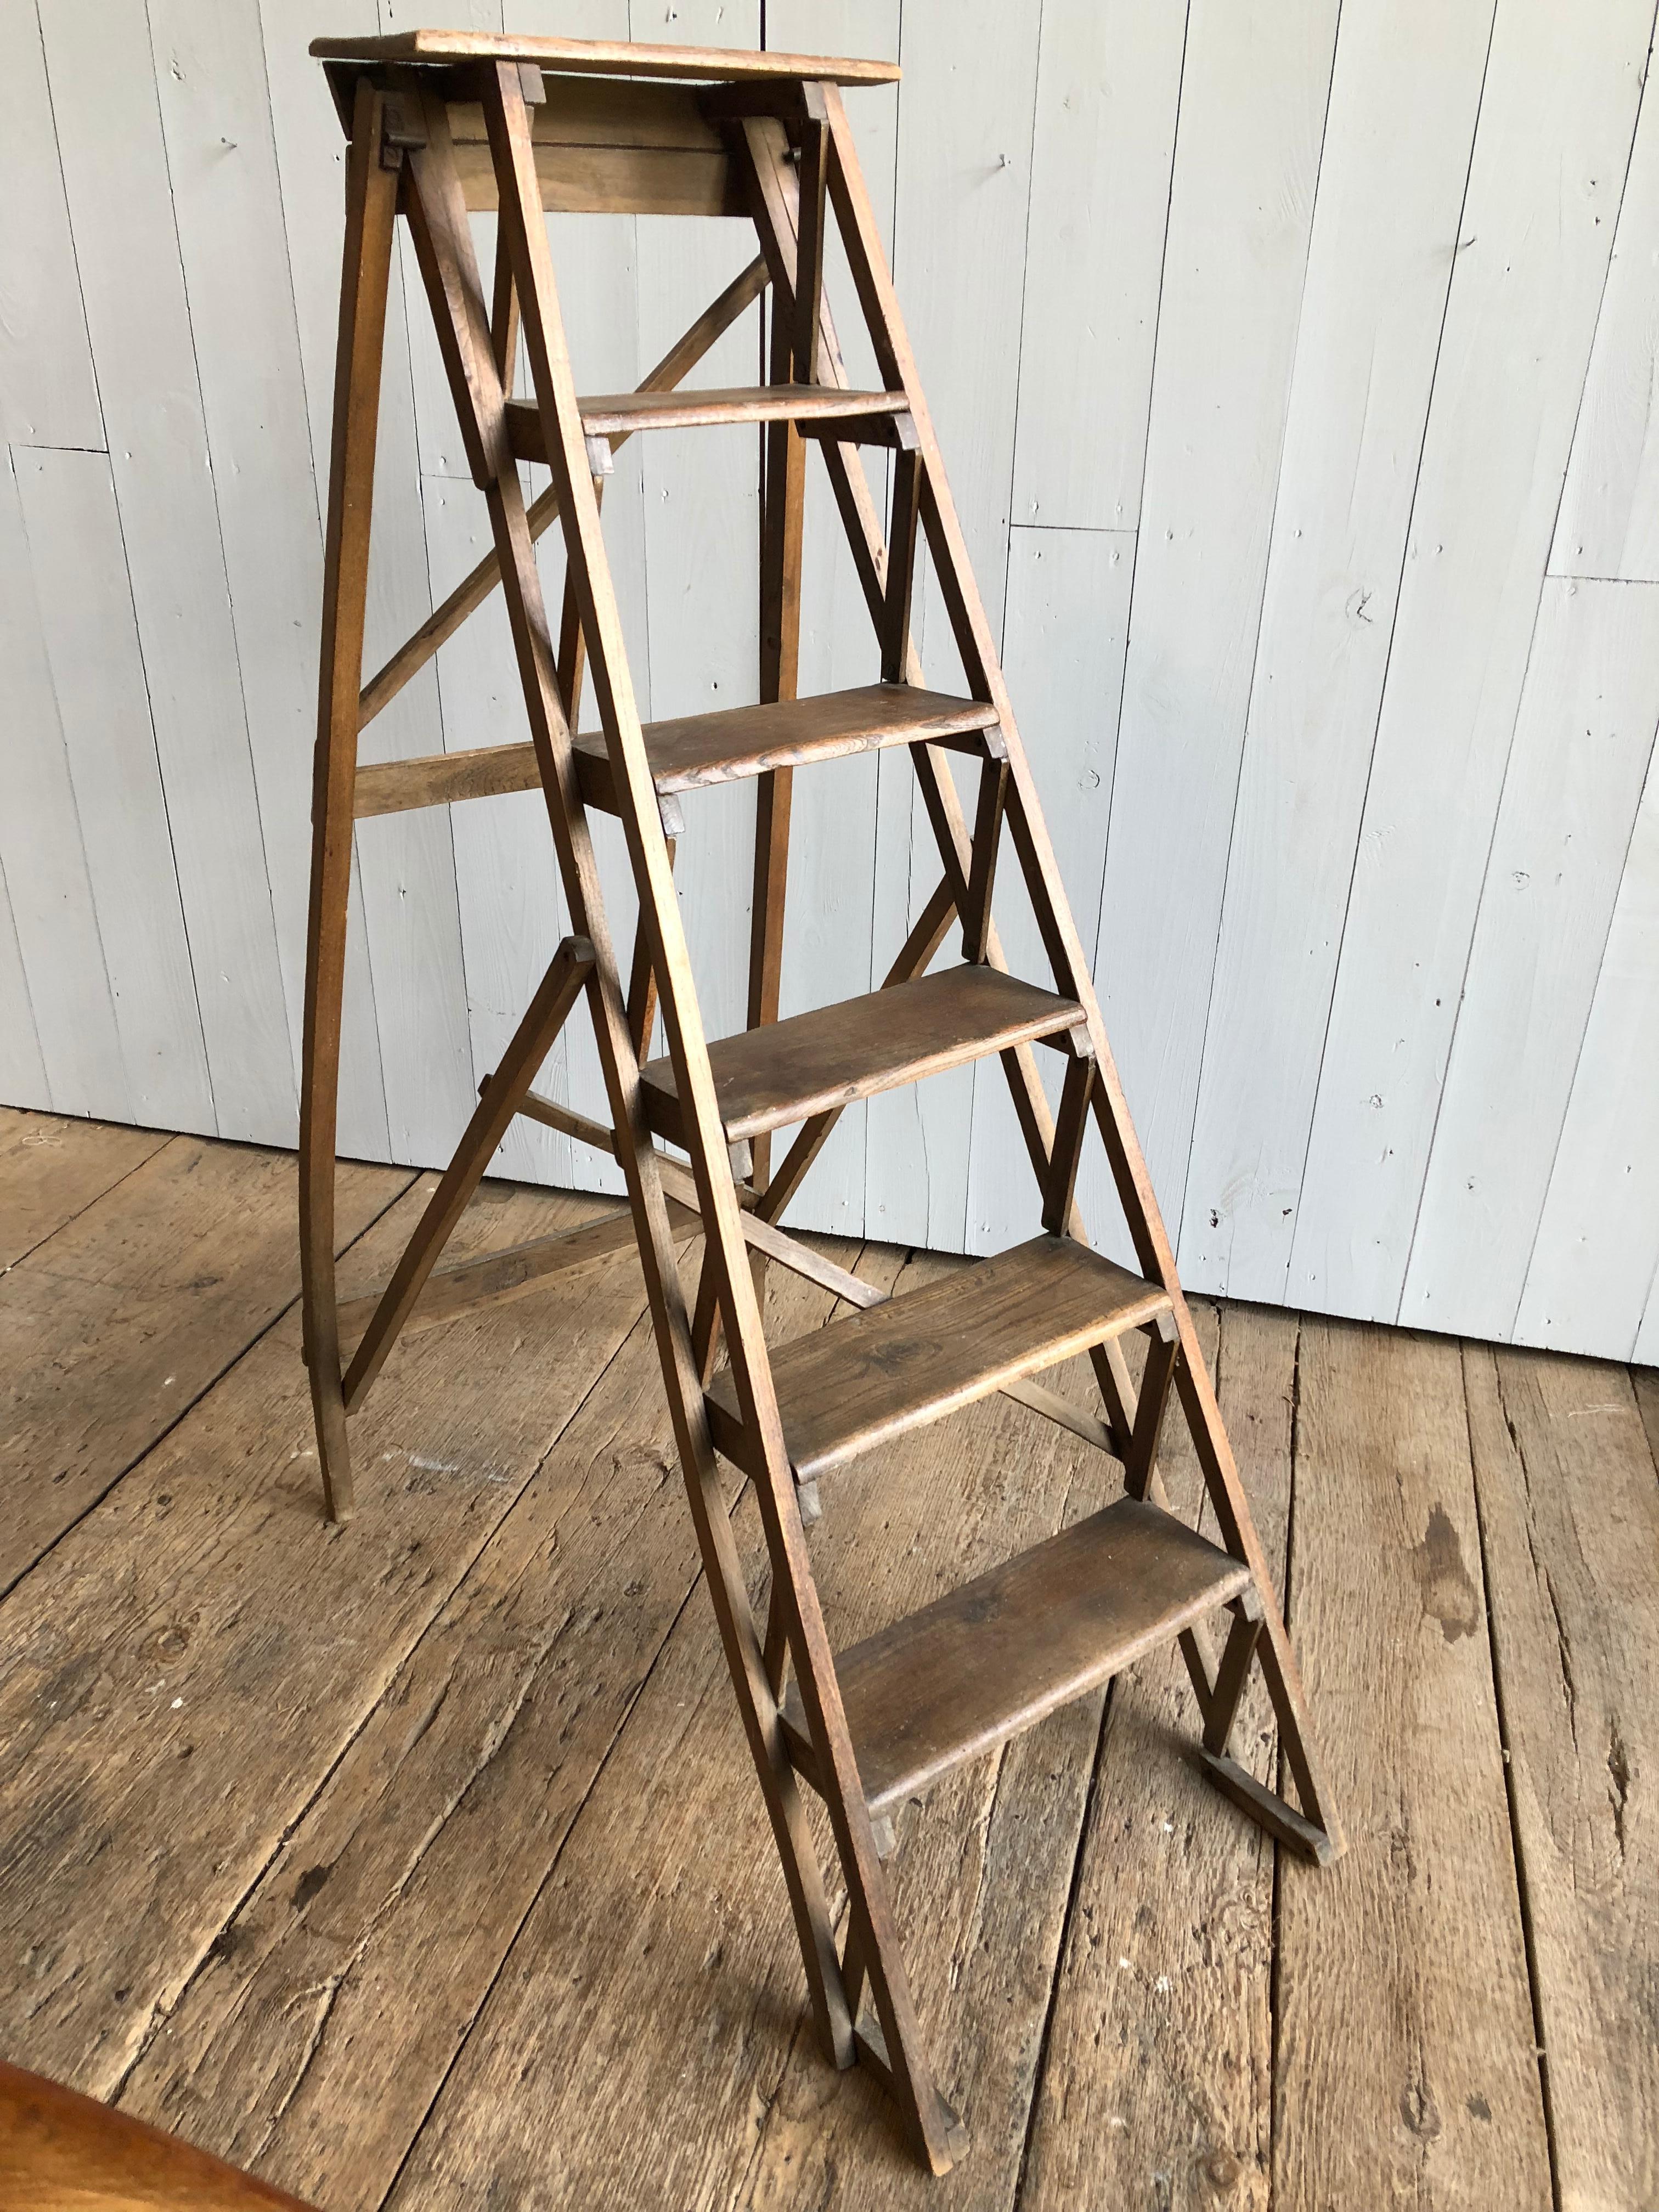 A charming 19th century folding ladder, likely from a general store or library, with 6 steps and a warped rear leg for character. Very sturdy.